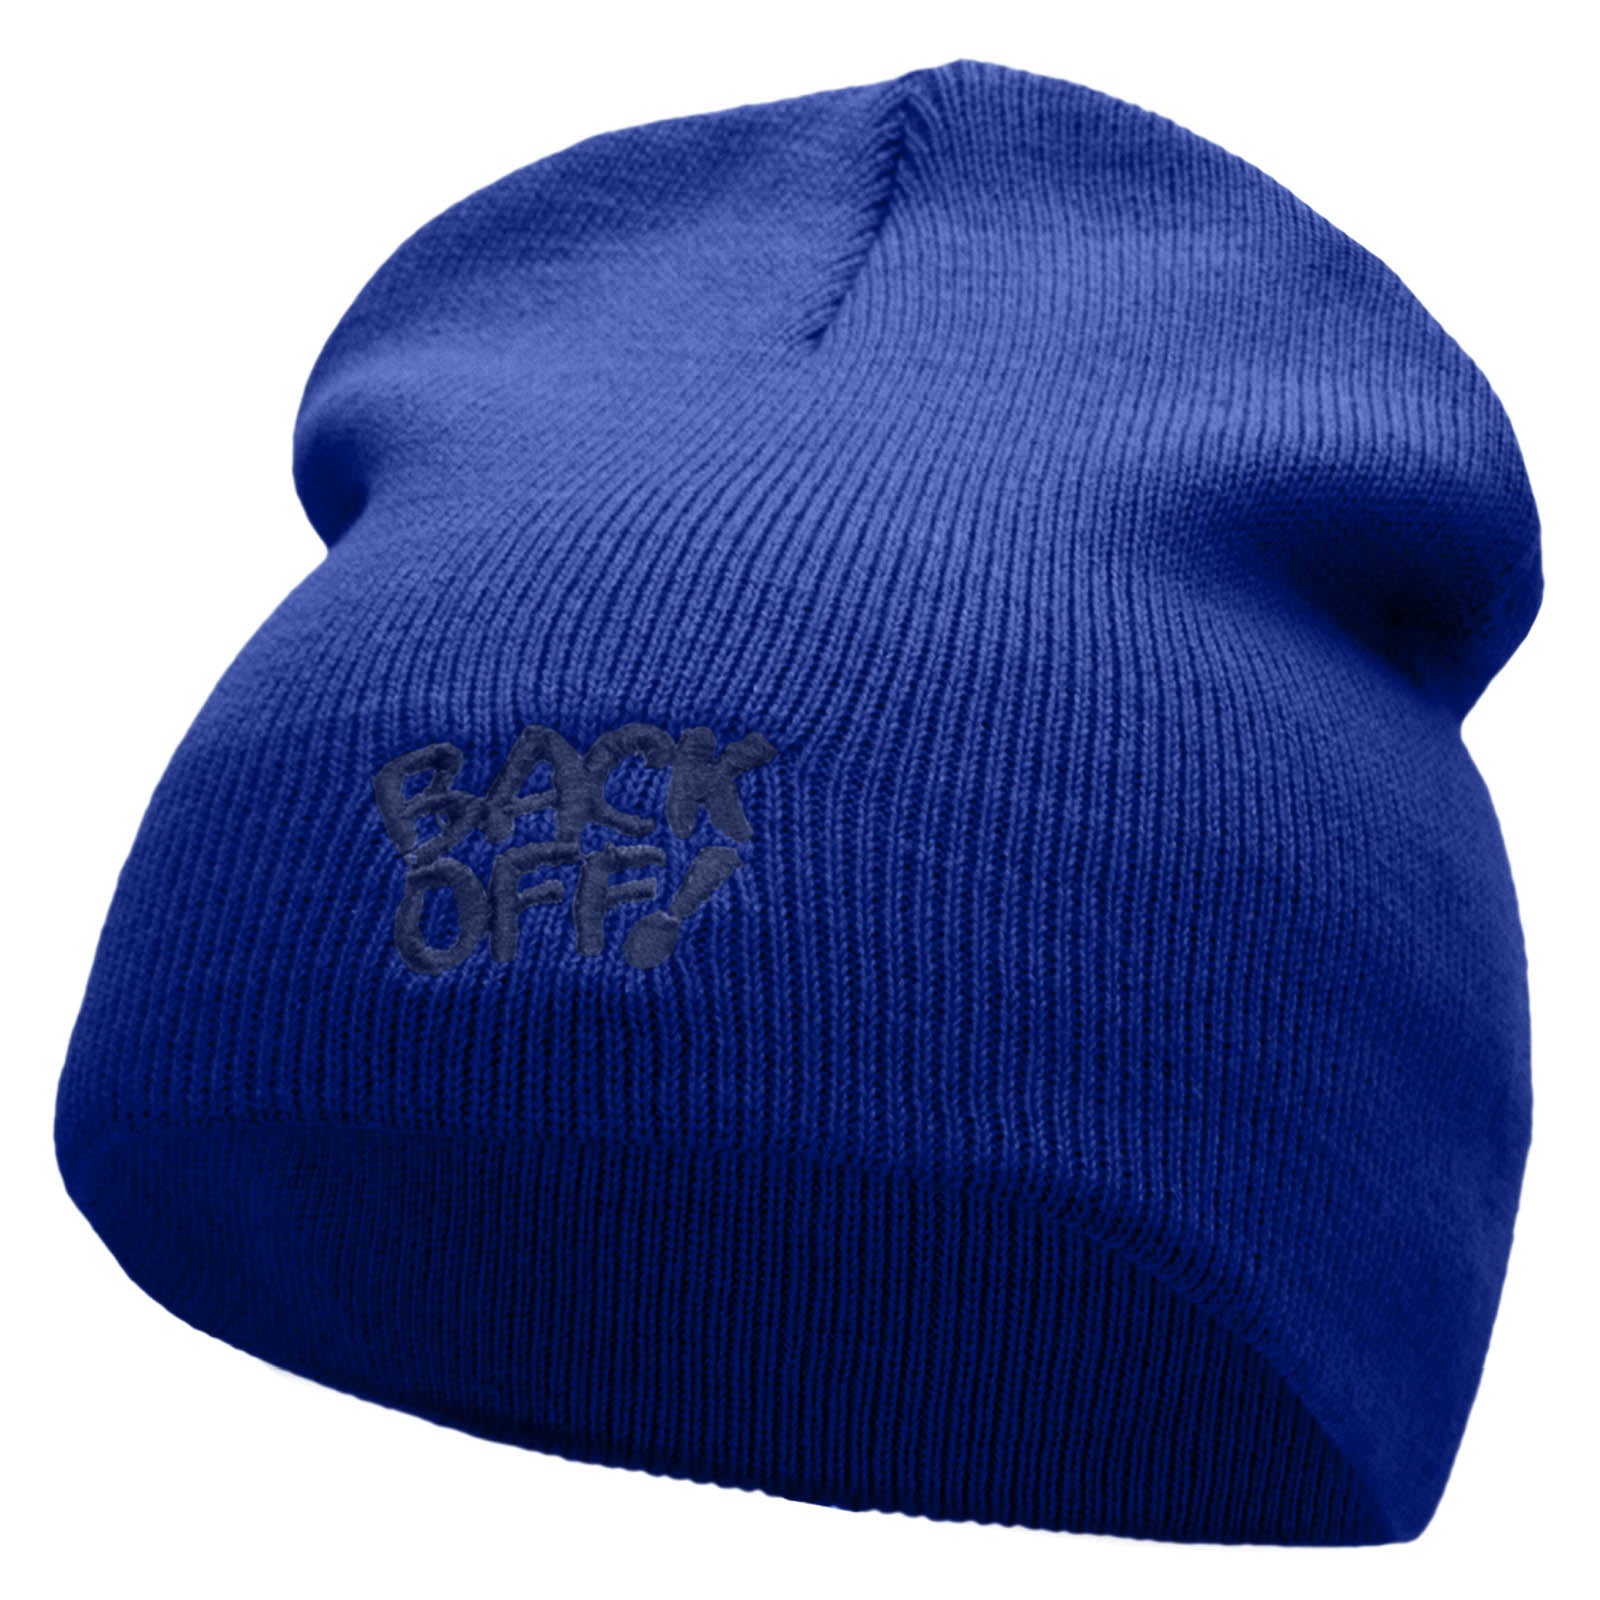 Back Off Saying Embroidered Short Beanie - Royal OSFM